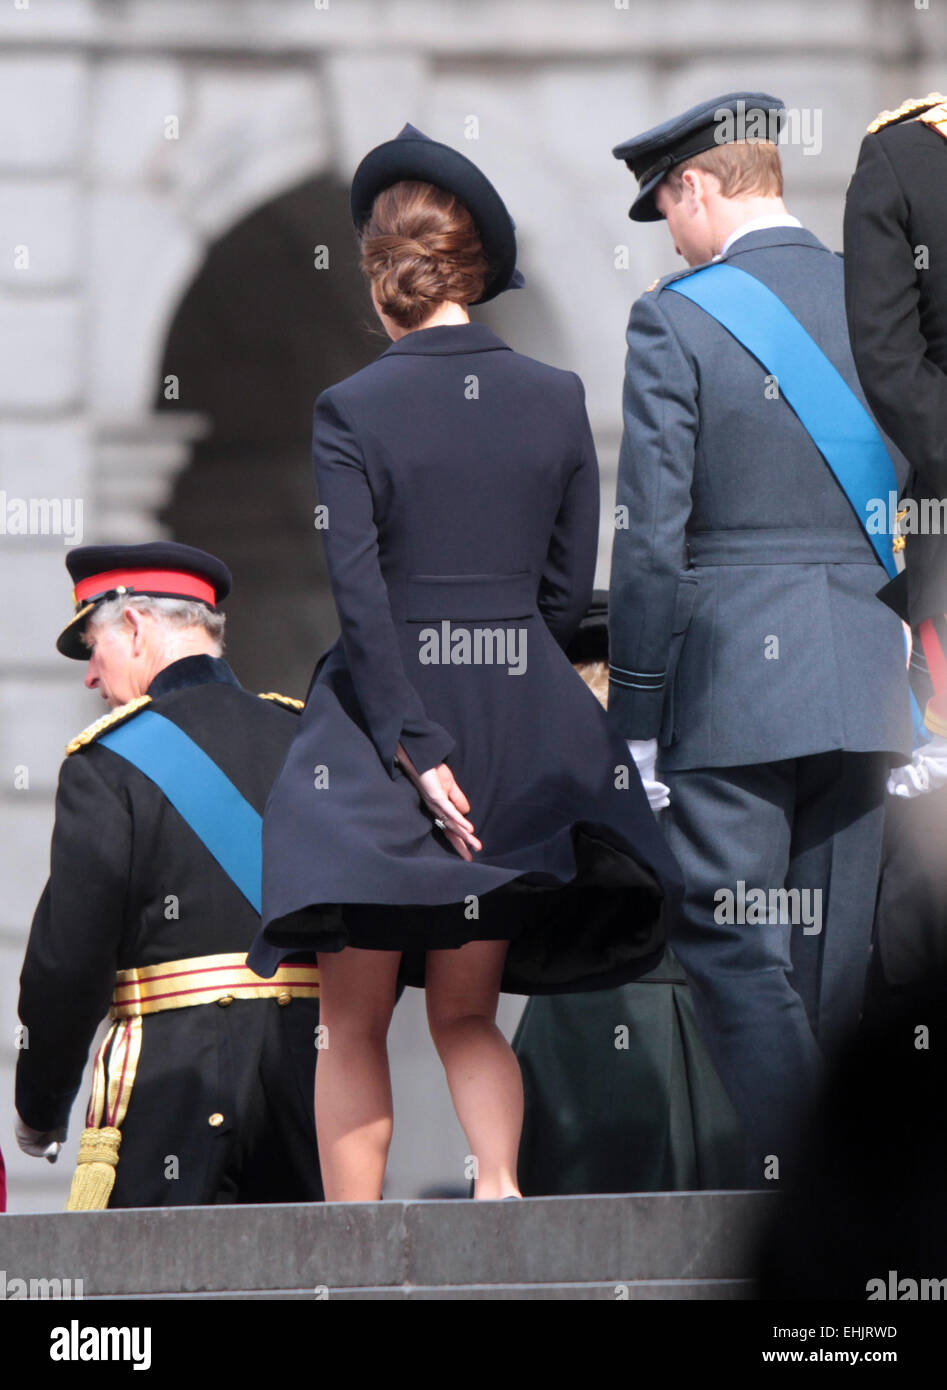 service-of-commemoration-st-pauls-cathedral-london-uk-13032015-kate-EHJRWD.jpg